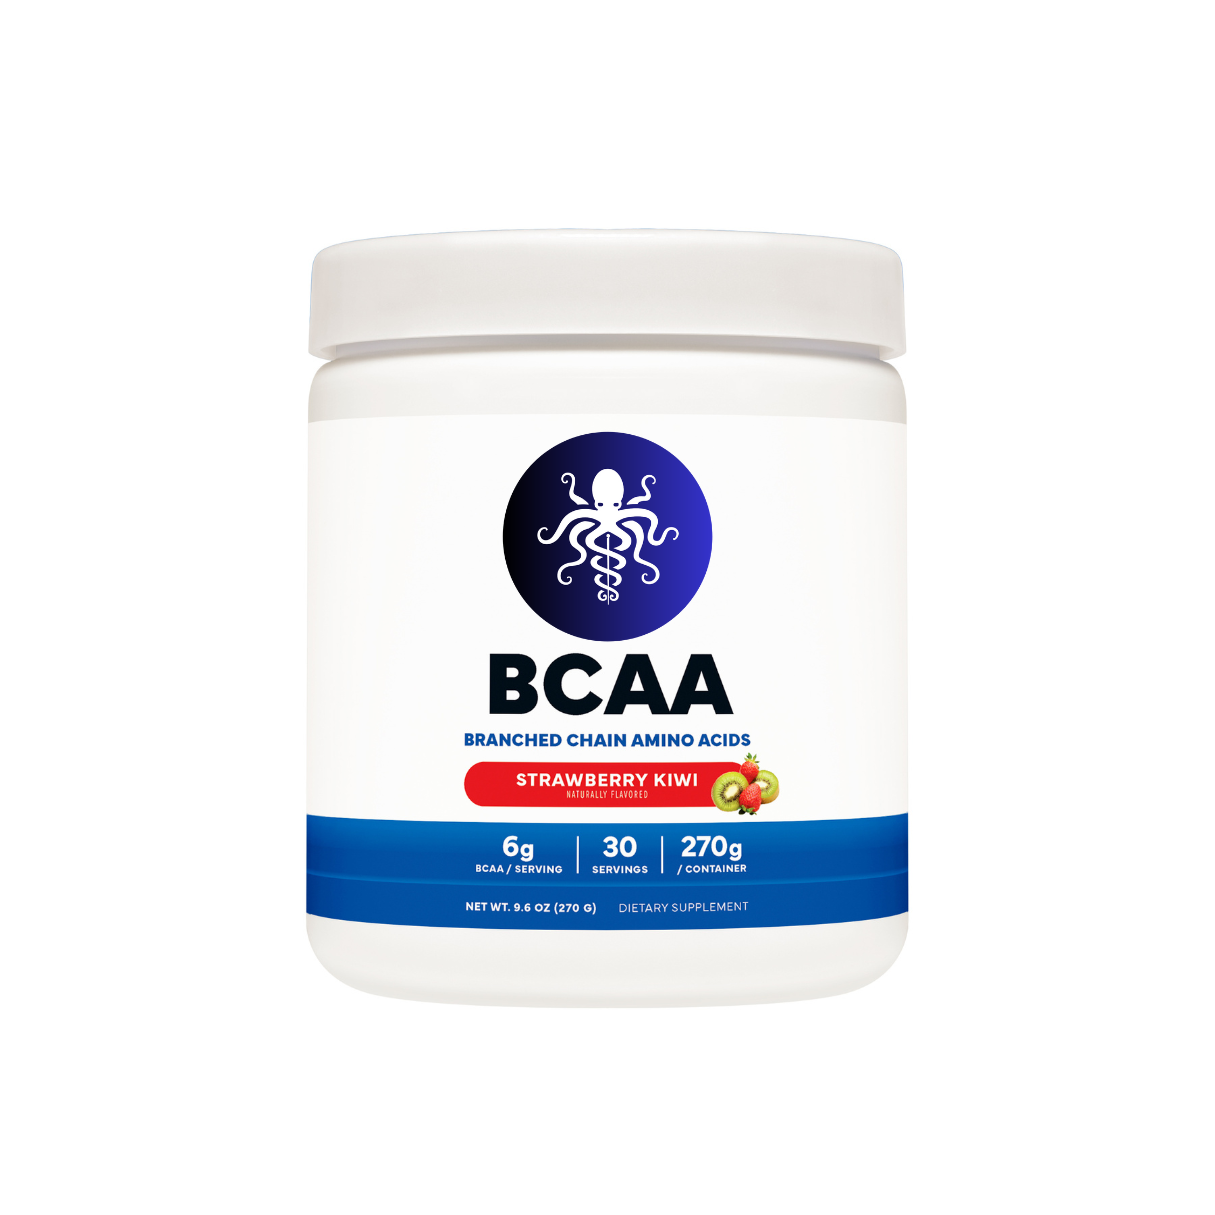 BCAA - Branched Chain Amino Acids 2:1:1